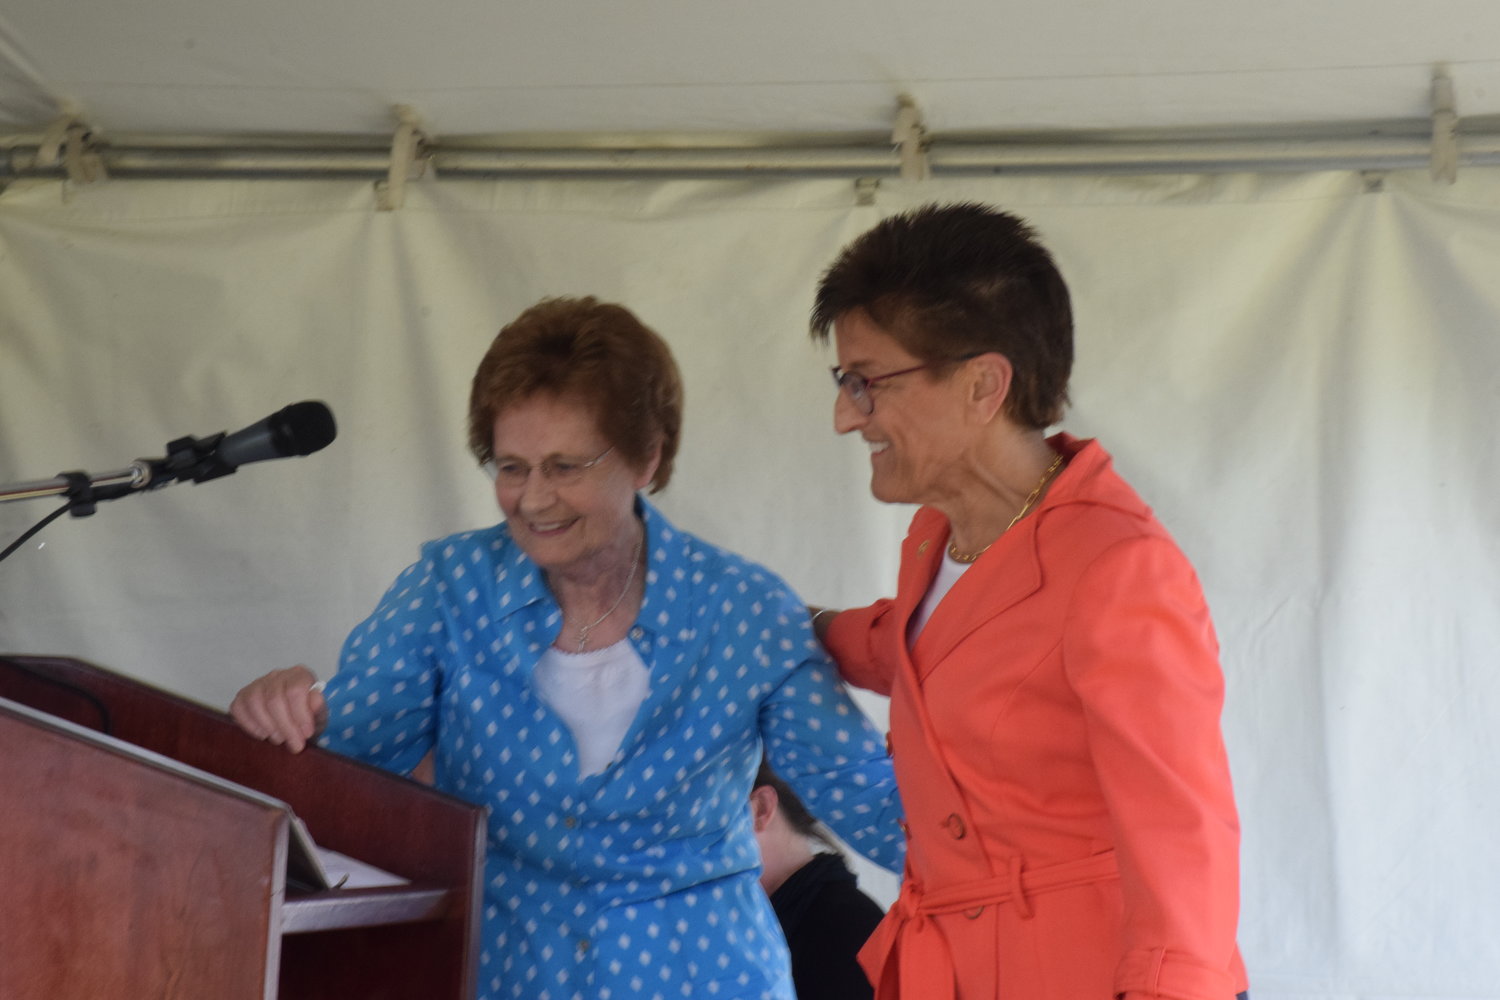 Outgoing Clark College Foundation CEO Lisa Gibert, right, turns the podium over to Bernice Boschma during a groundbreaking ceremony for Clark College at Boschma Farms June 1.